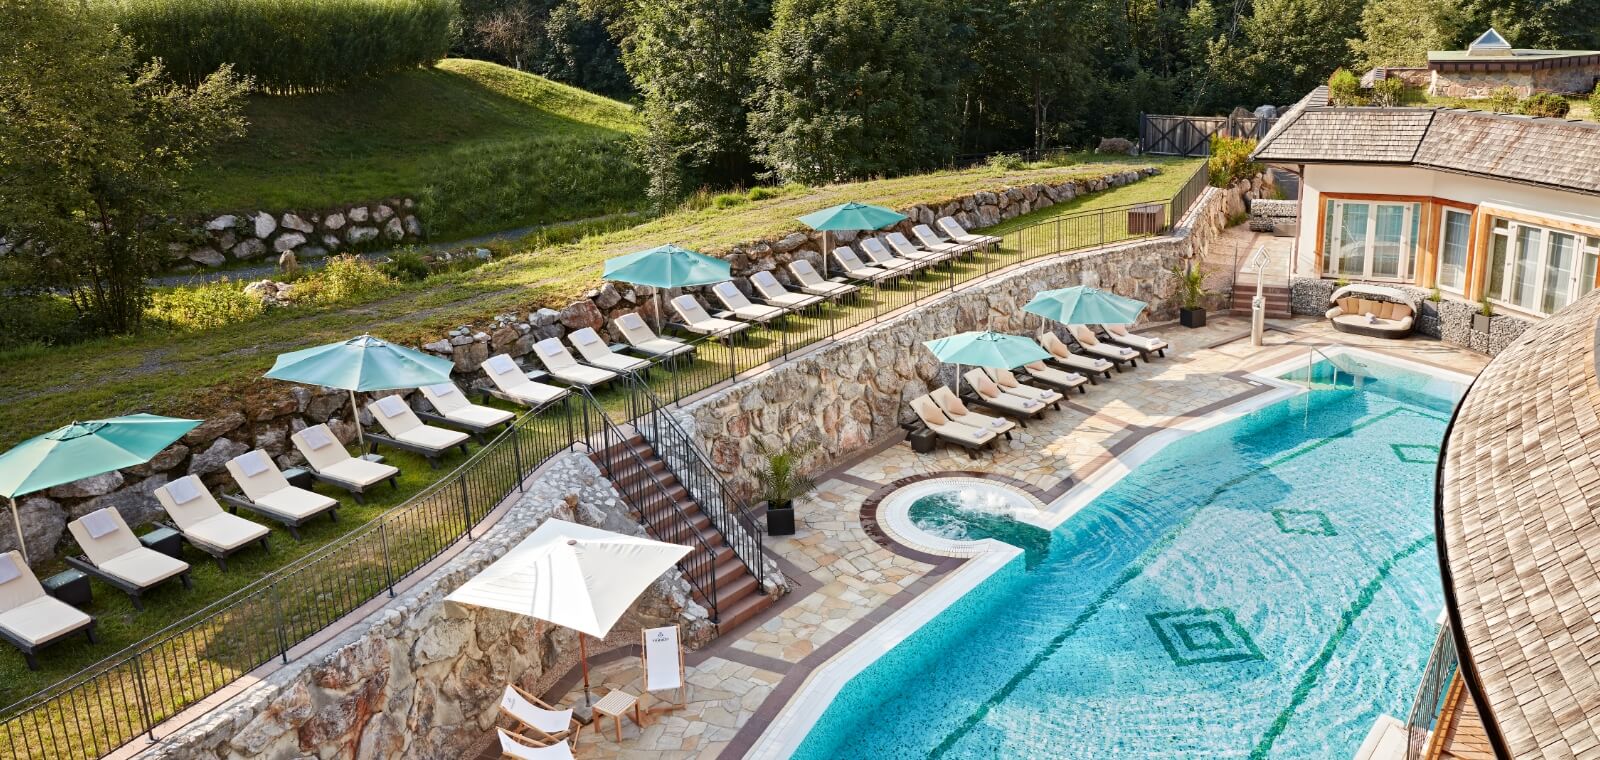 The pool and loungers in the outdoor area of the spa hotel in Kitzbühel